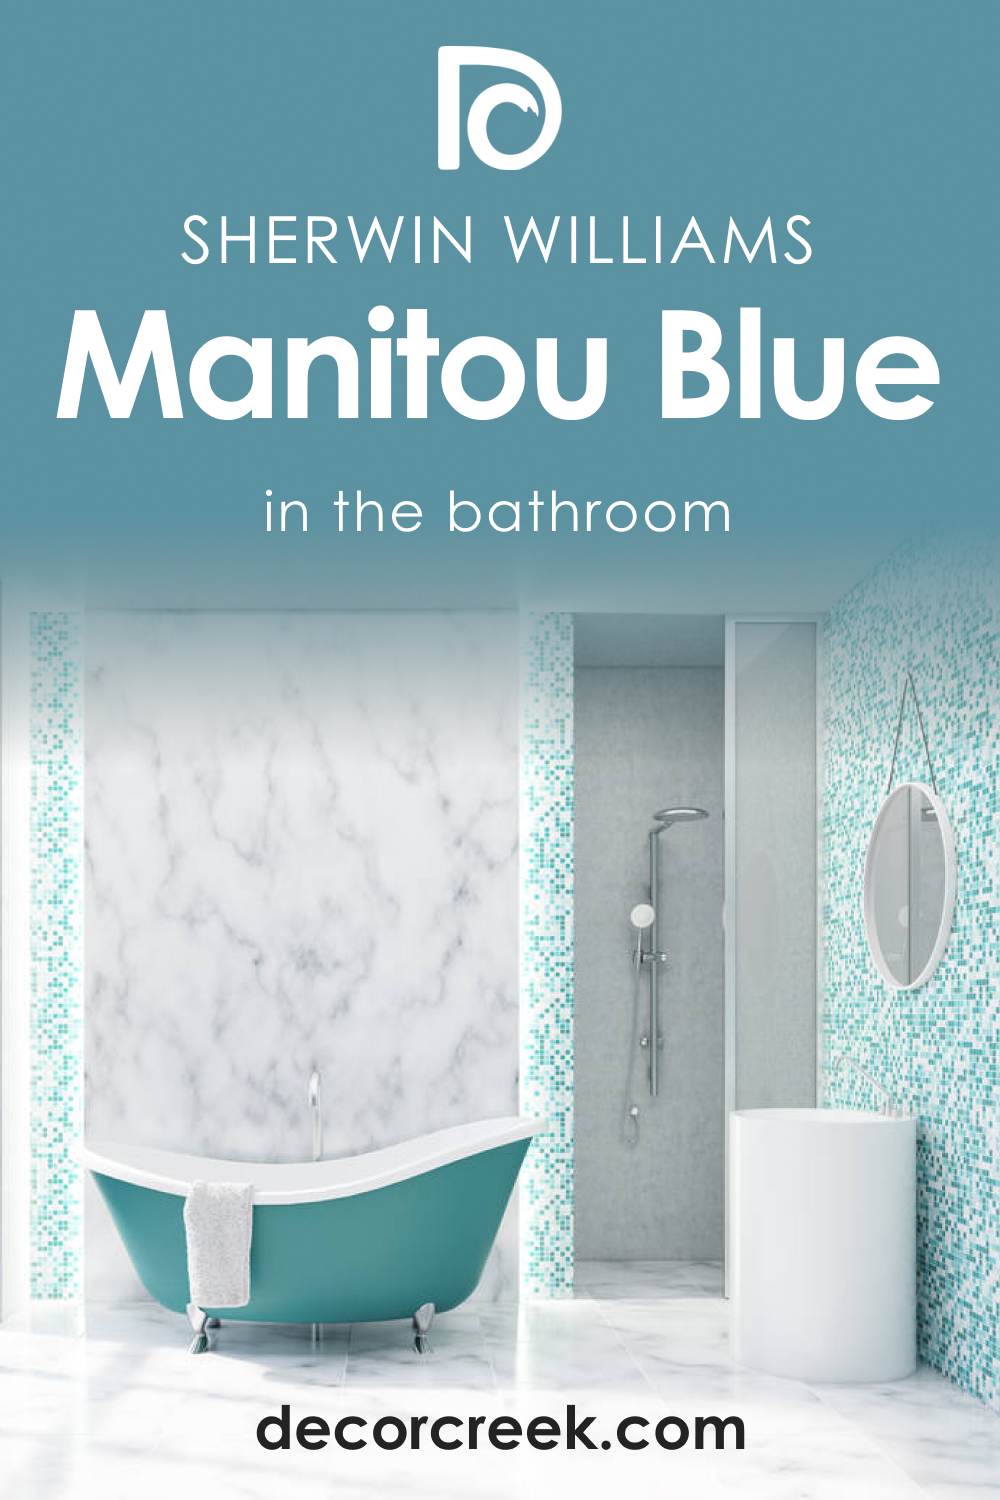 How to Use SW 6501 Manitou Blue in the Bathroom?